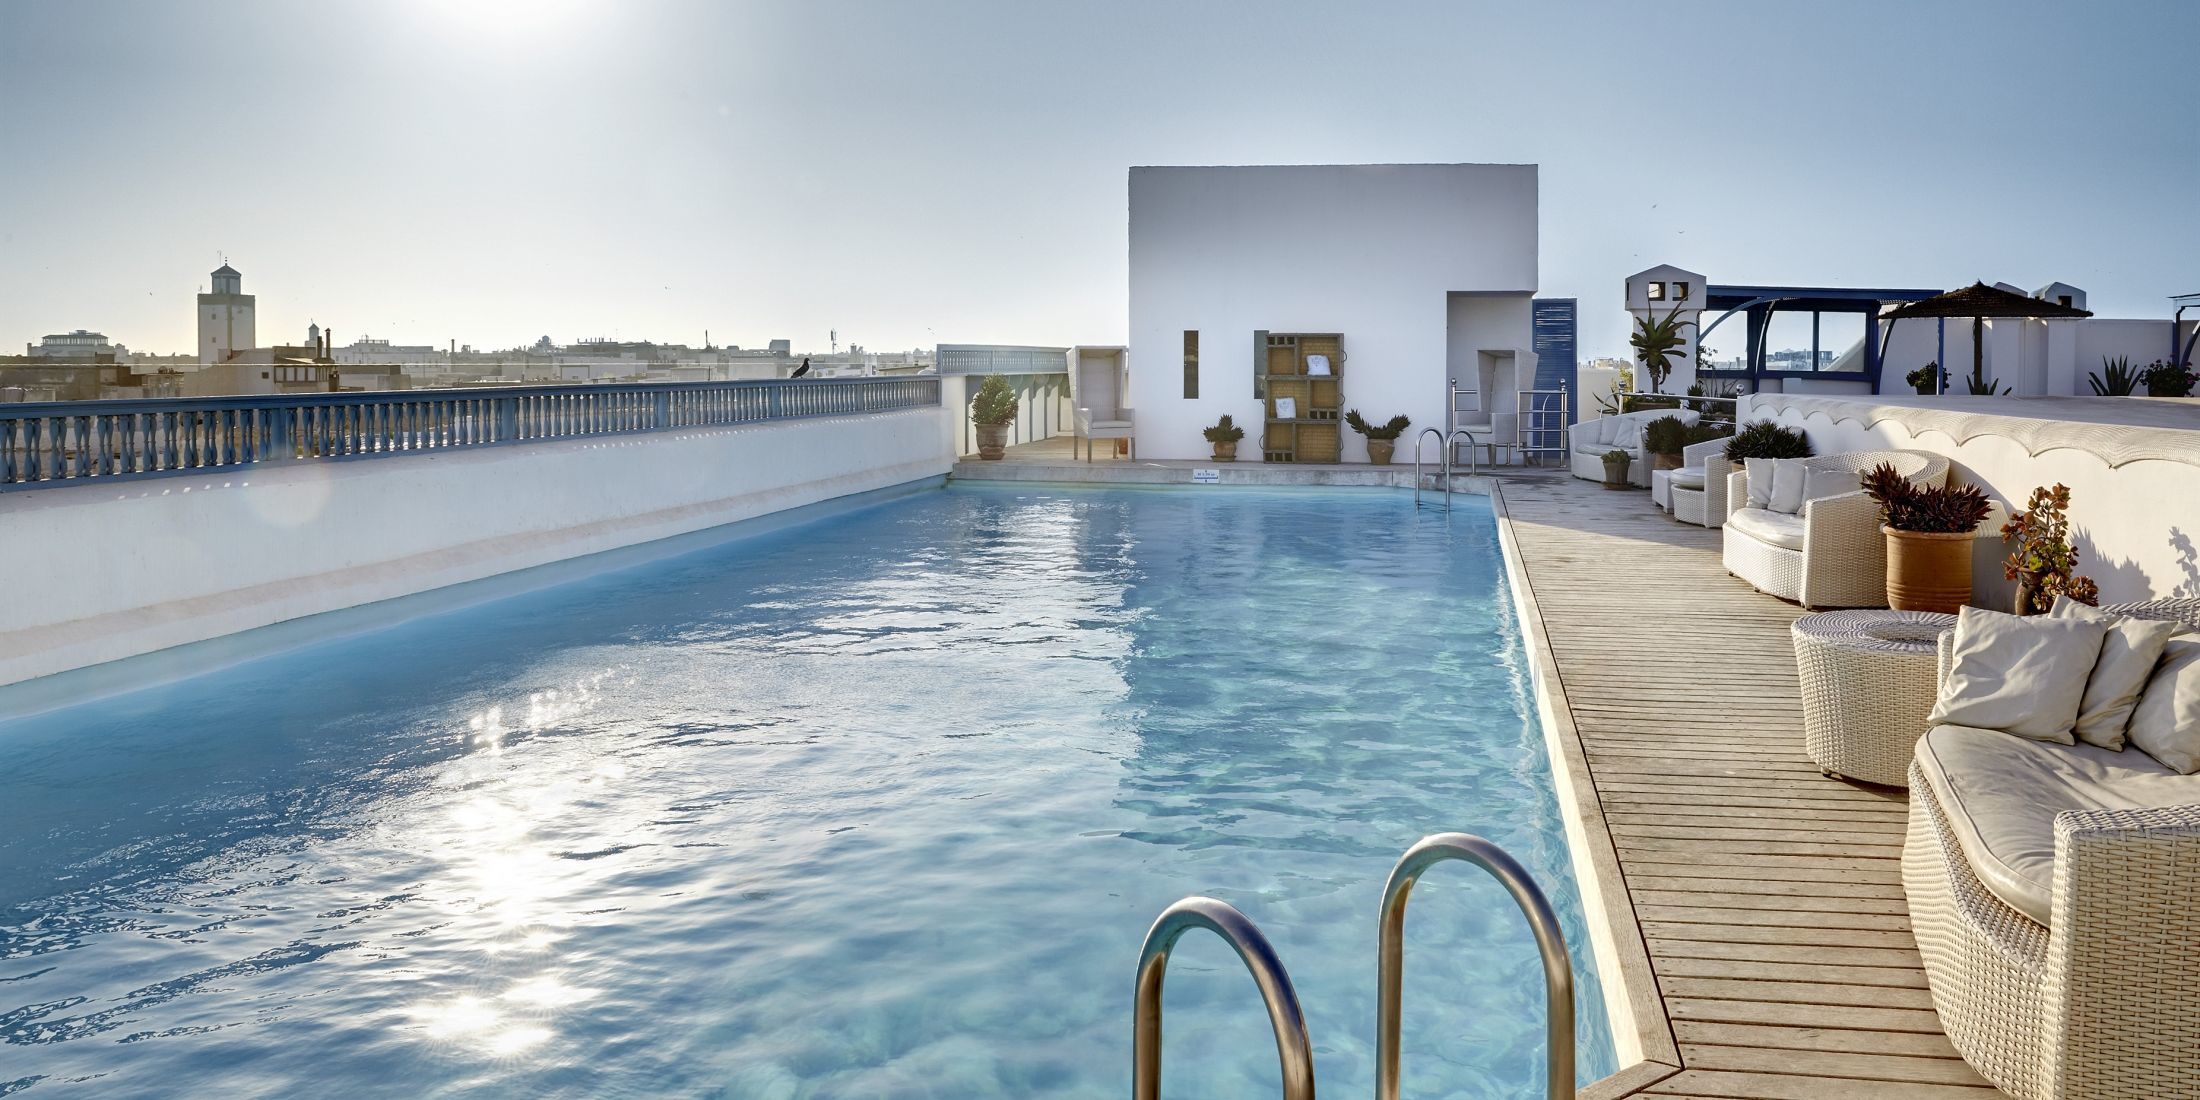 Heure Bleue Palais hotel pool in Morocco